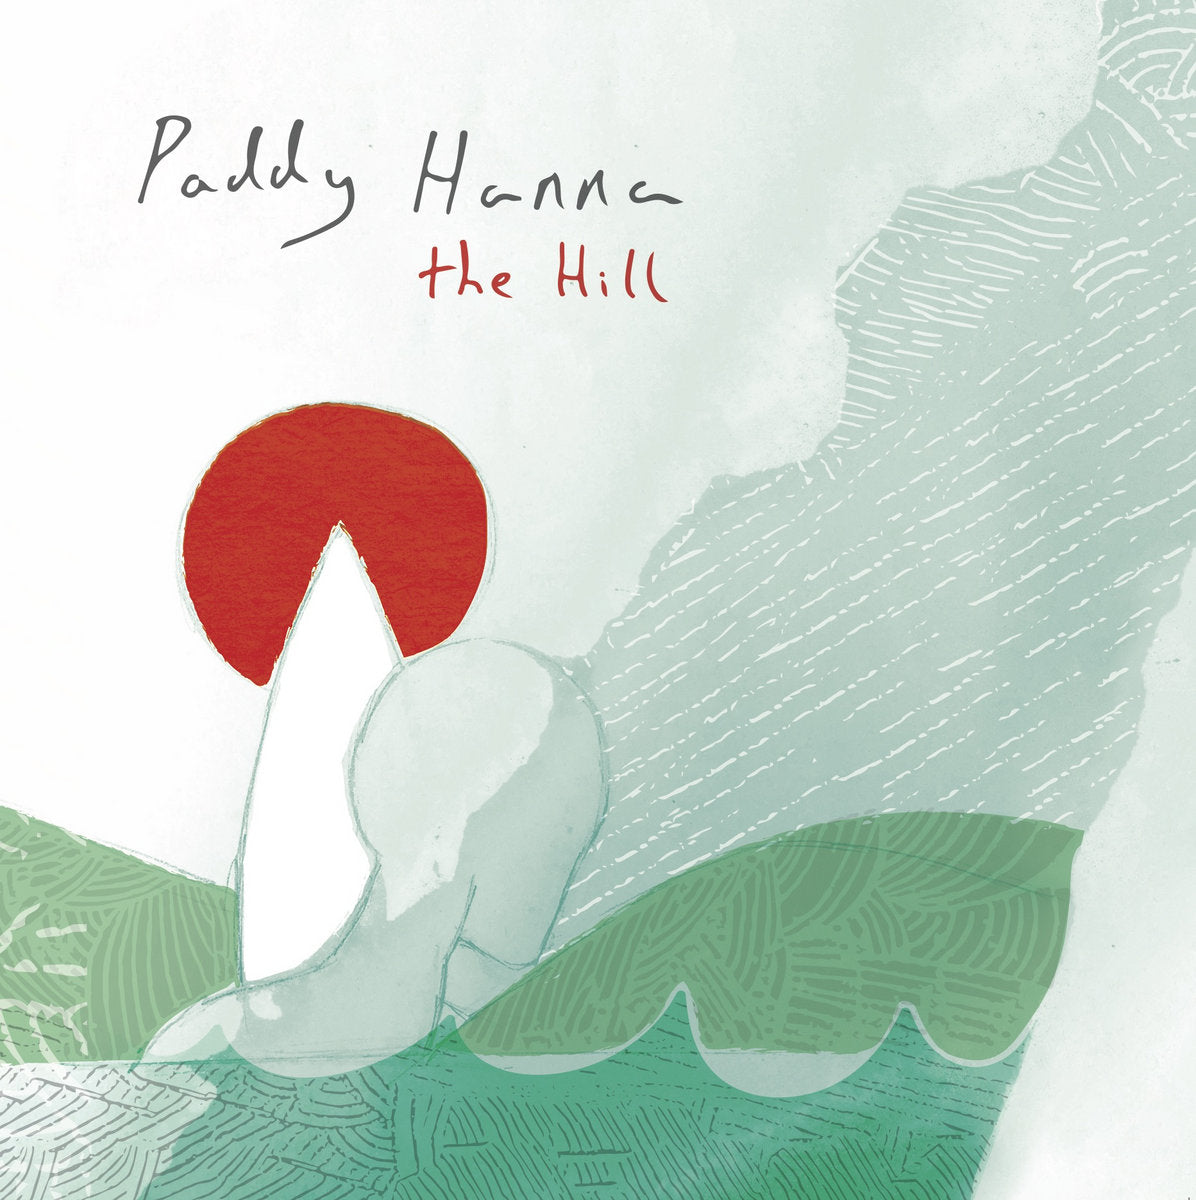 PADDY HANNA - The Hill - LP - Limited White Vinyl [OCT 16th]